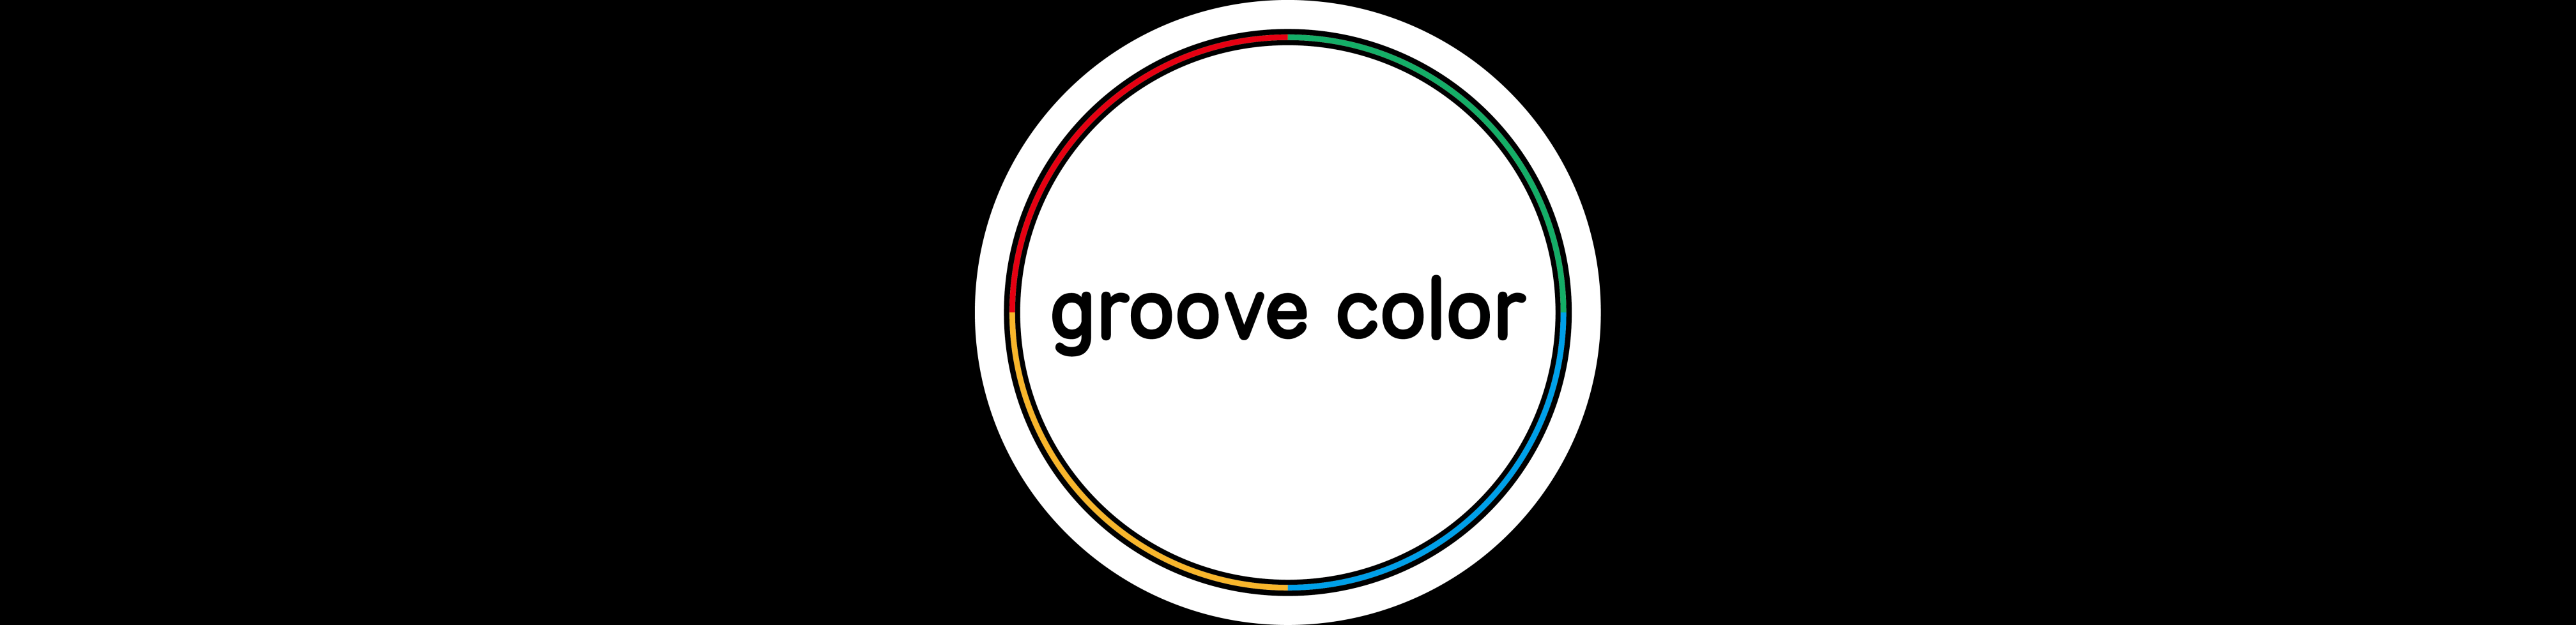 groove color